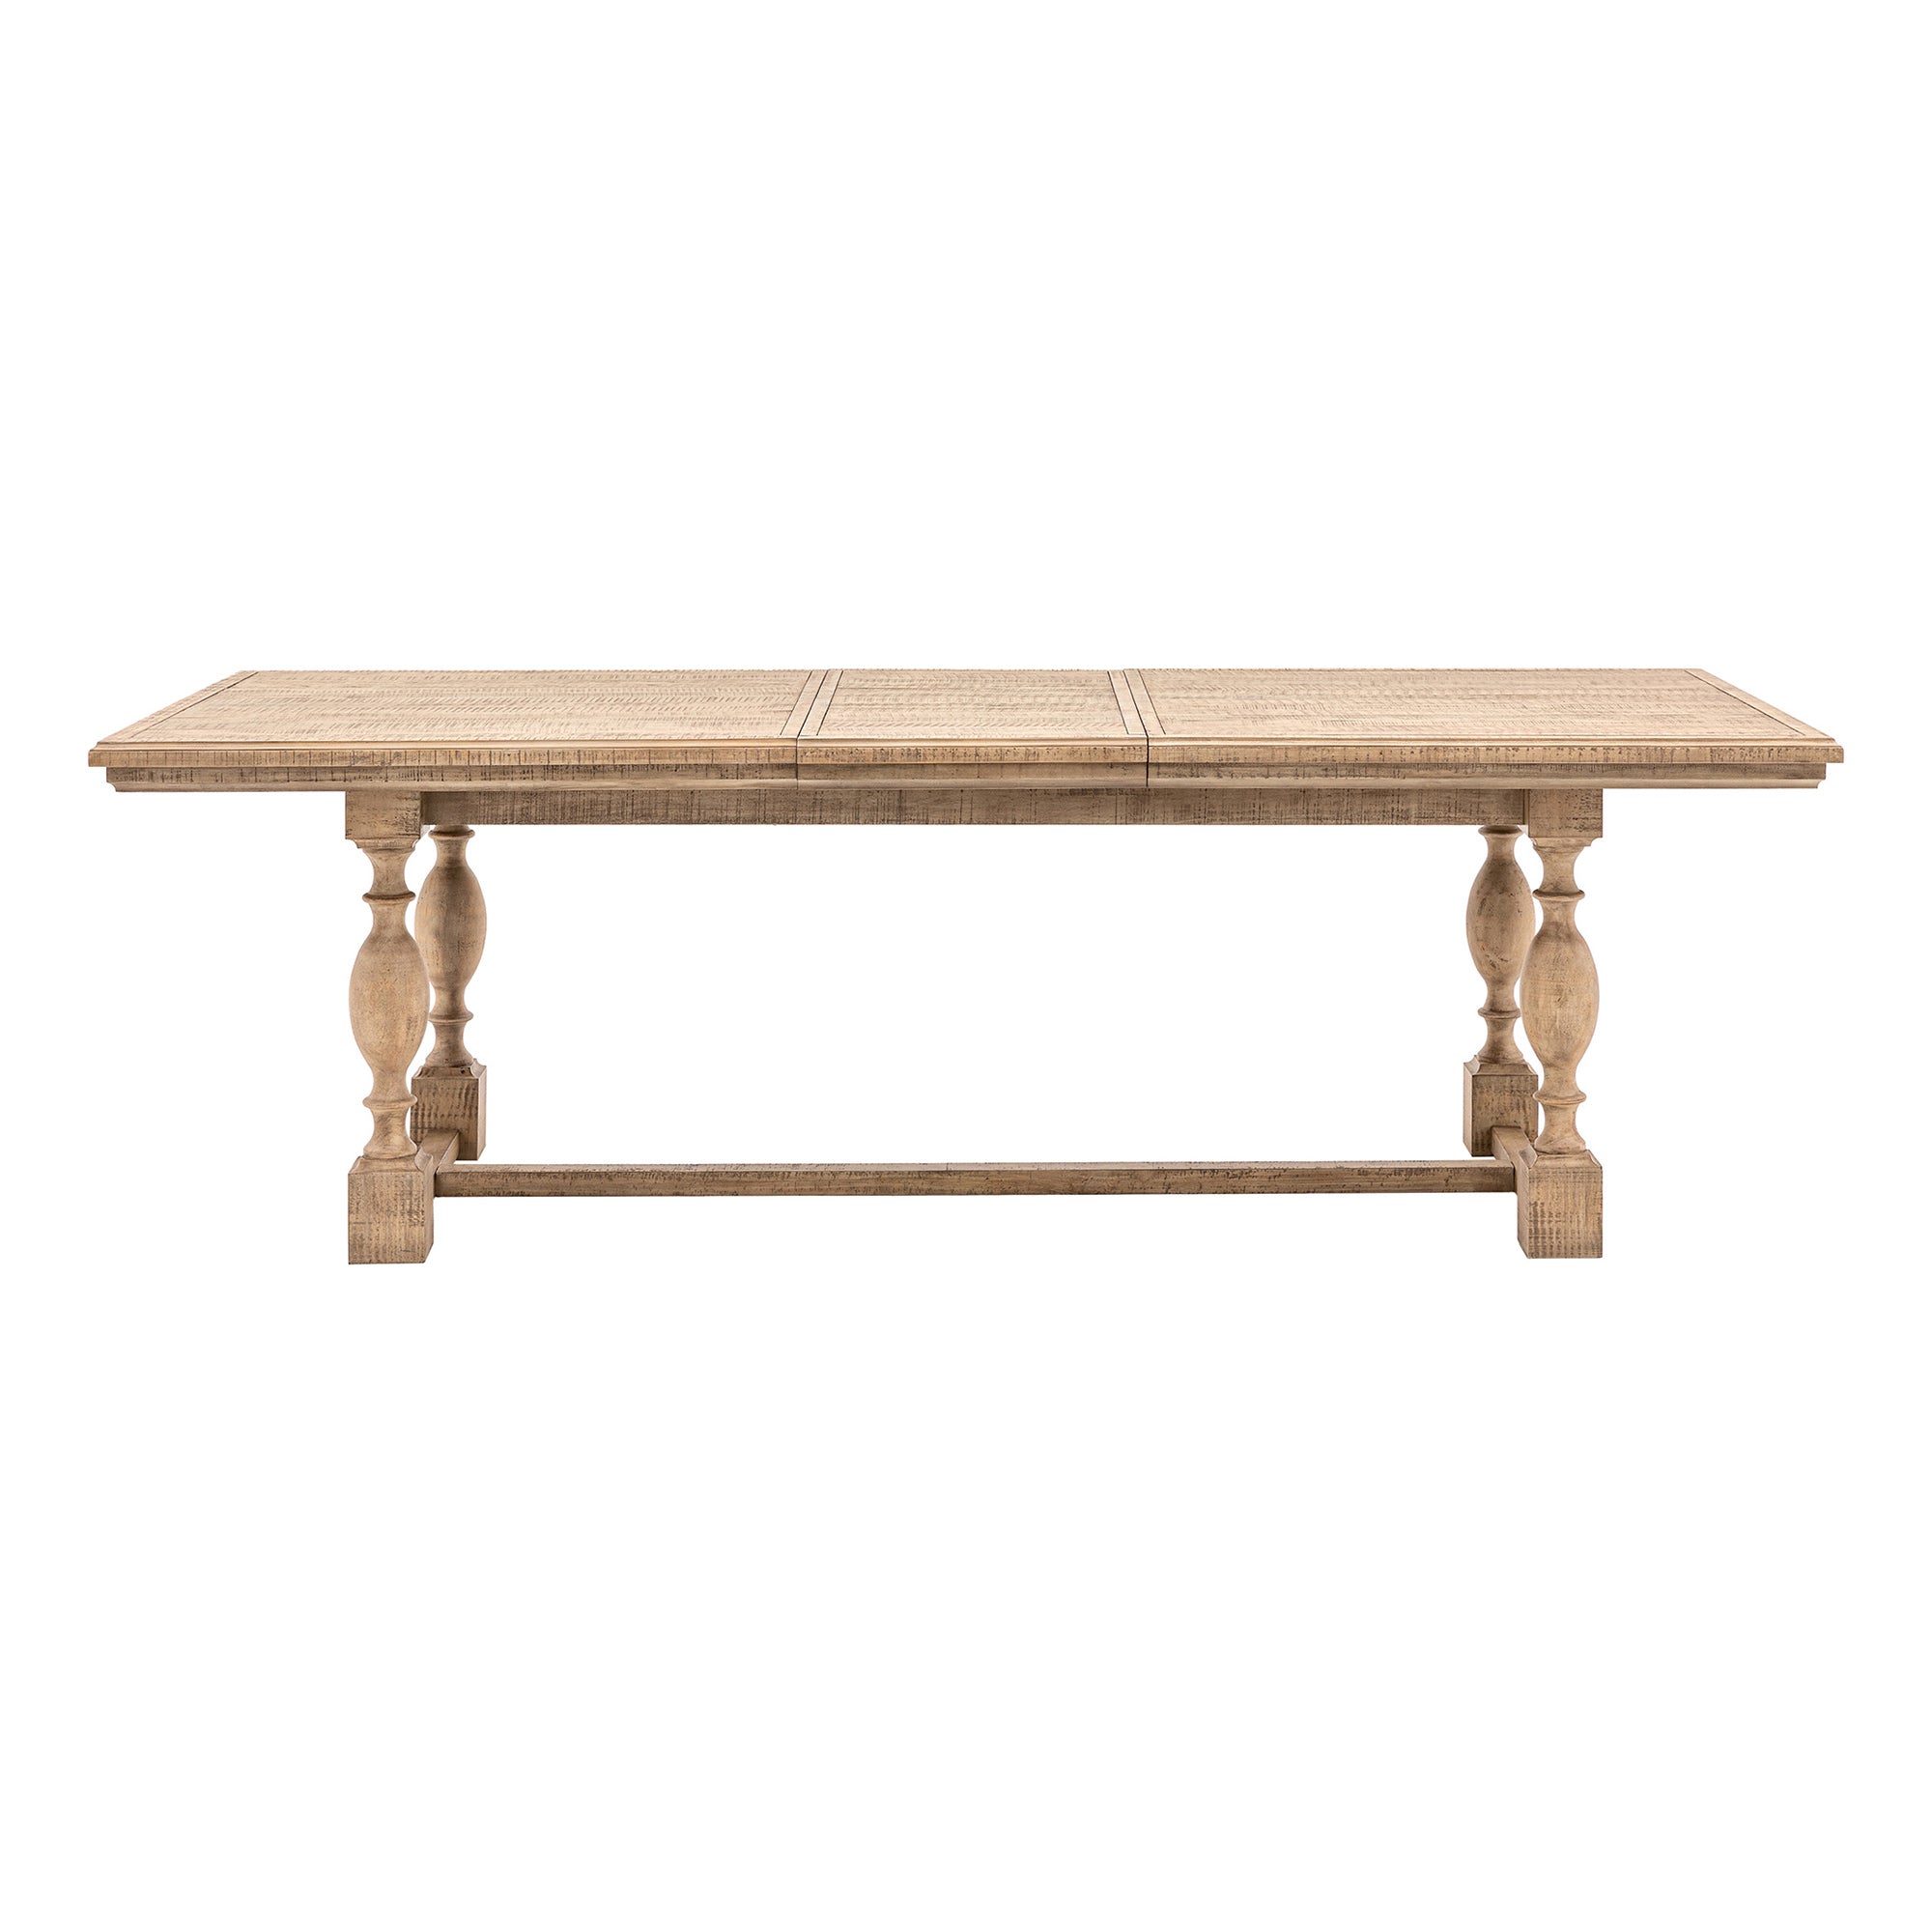 The Pine Over Extendable Dining Table